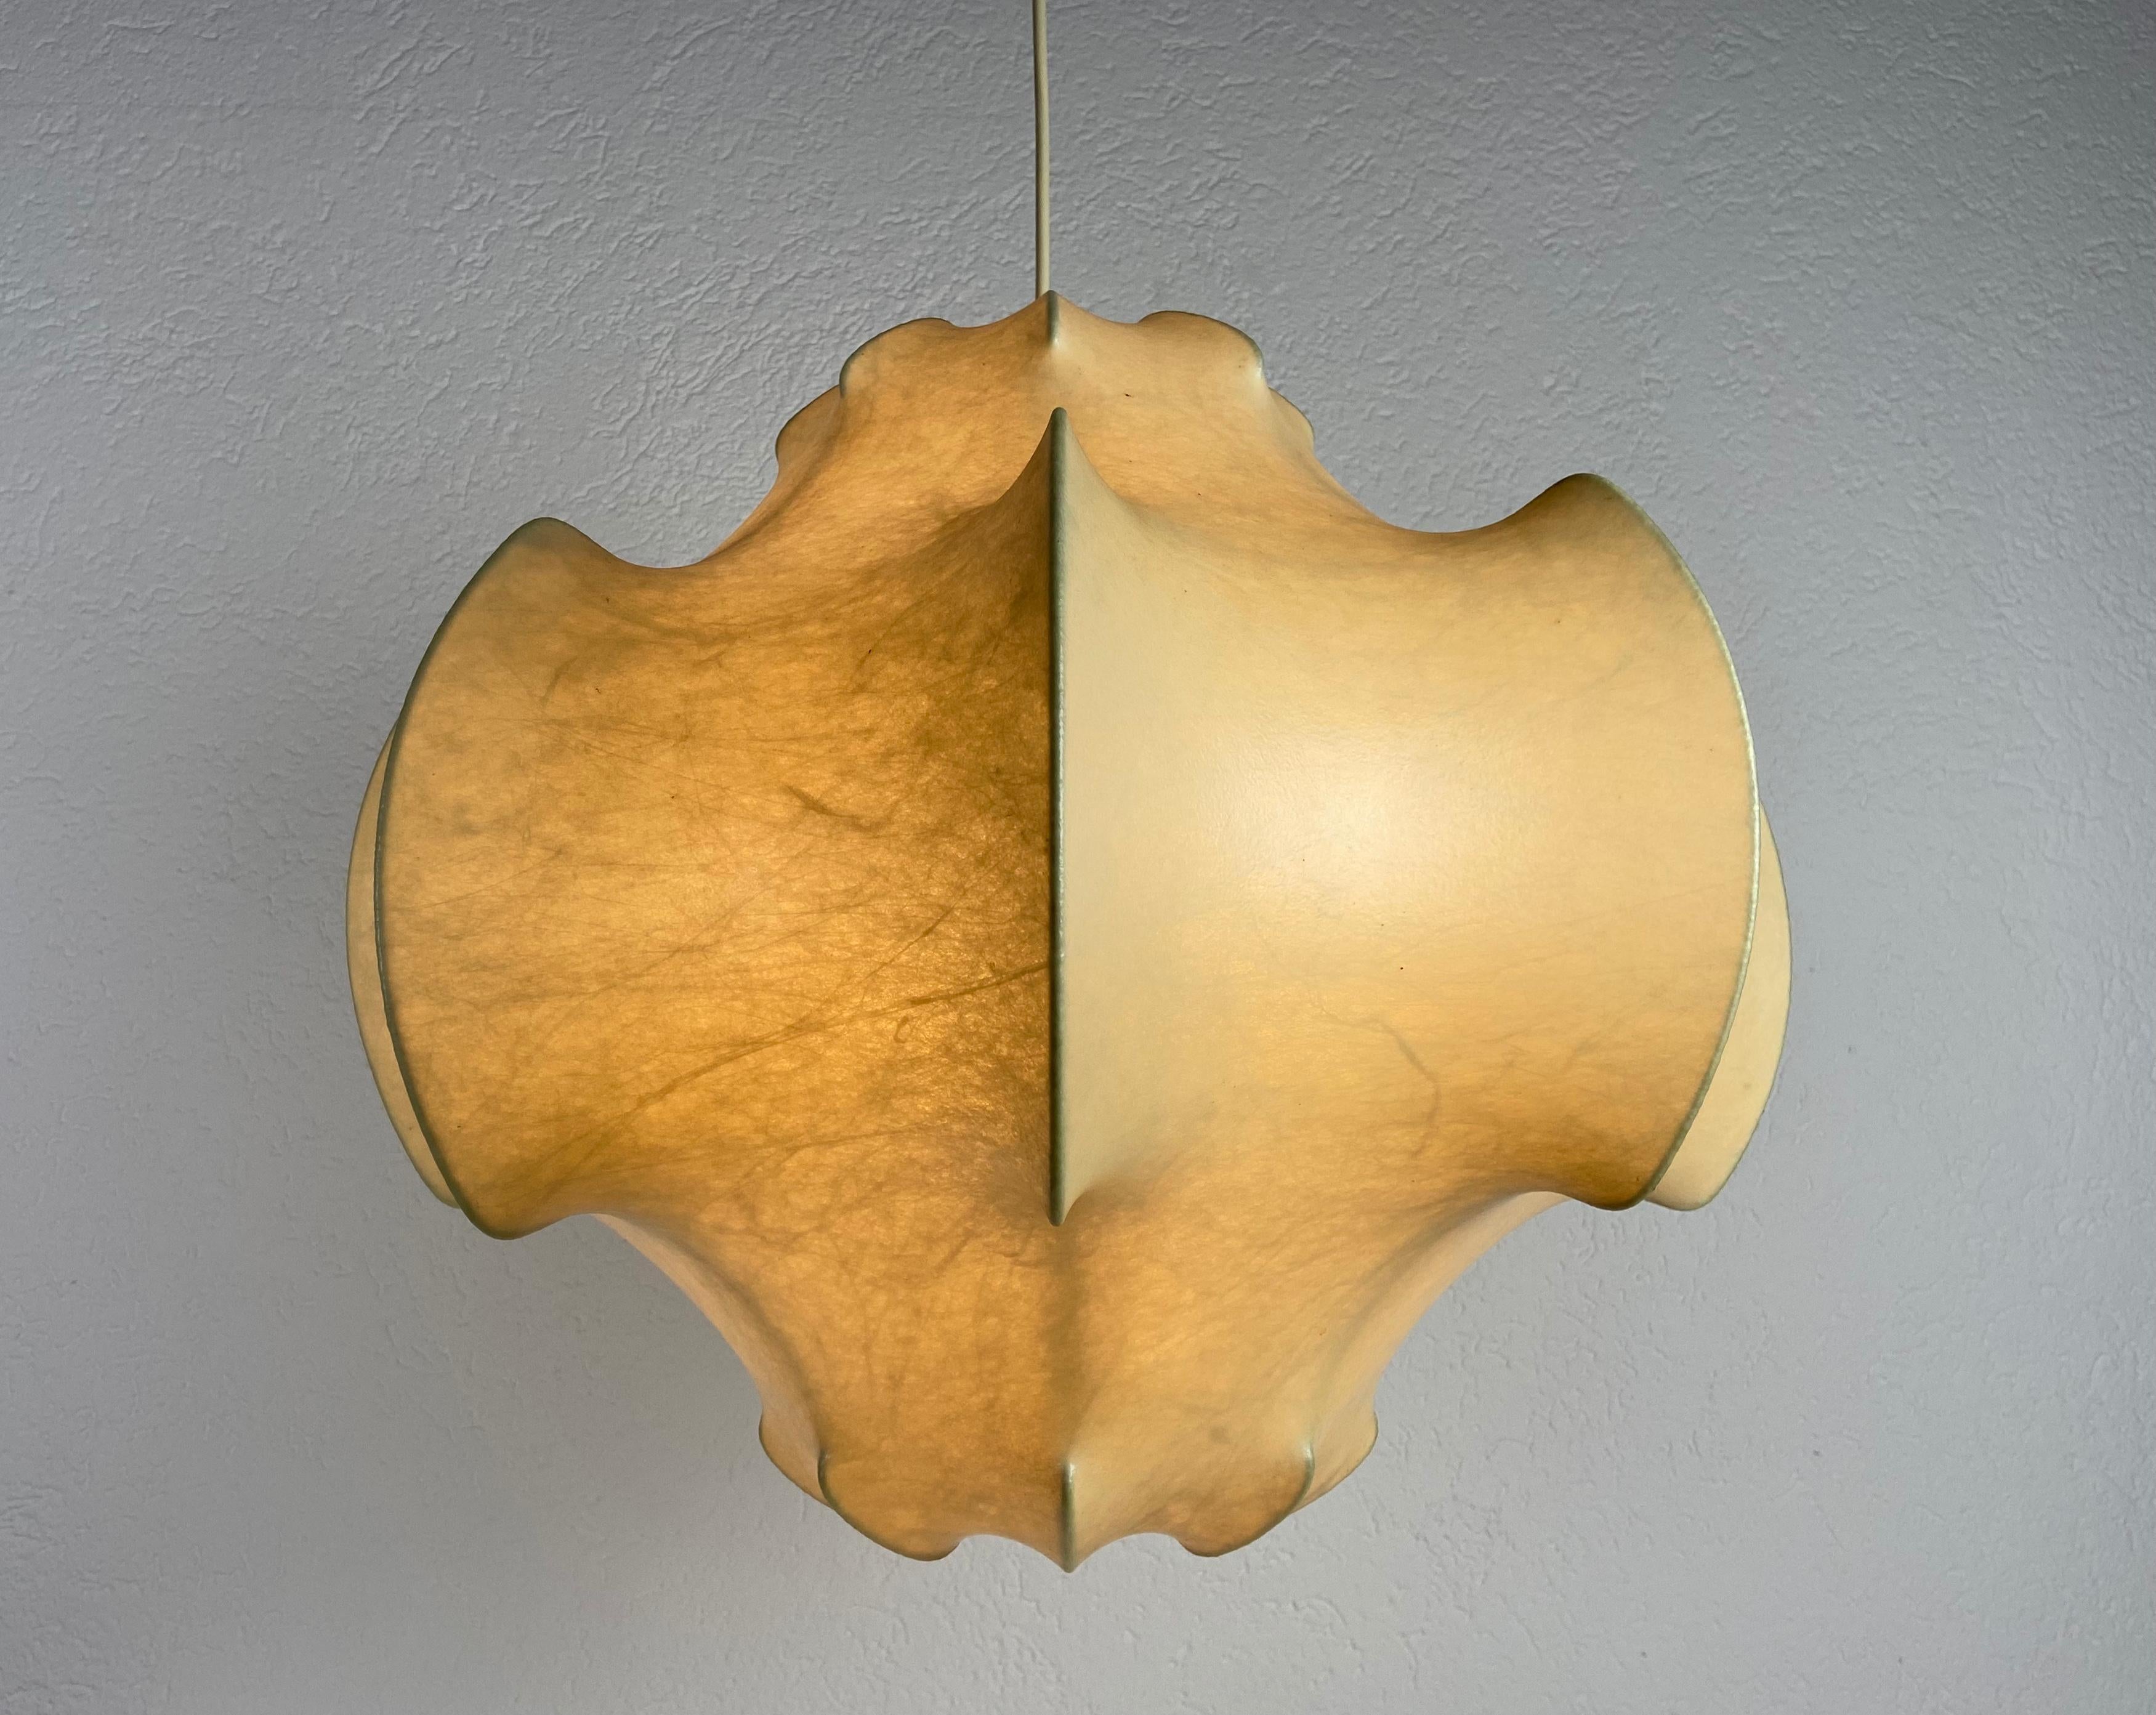 Large Viscontea pendant lamp made in Italy in the 1960s. The hanging lamp has been designed by Achille and Pier Giacomo Castiglioni for Flos. The lamp shade is of original resin.

Measures: 

Height of shade 45 cm

Total height up to 93